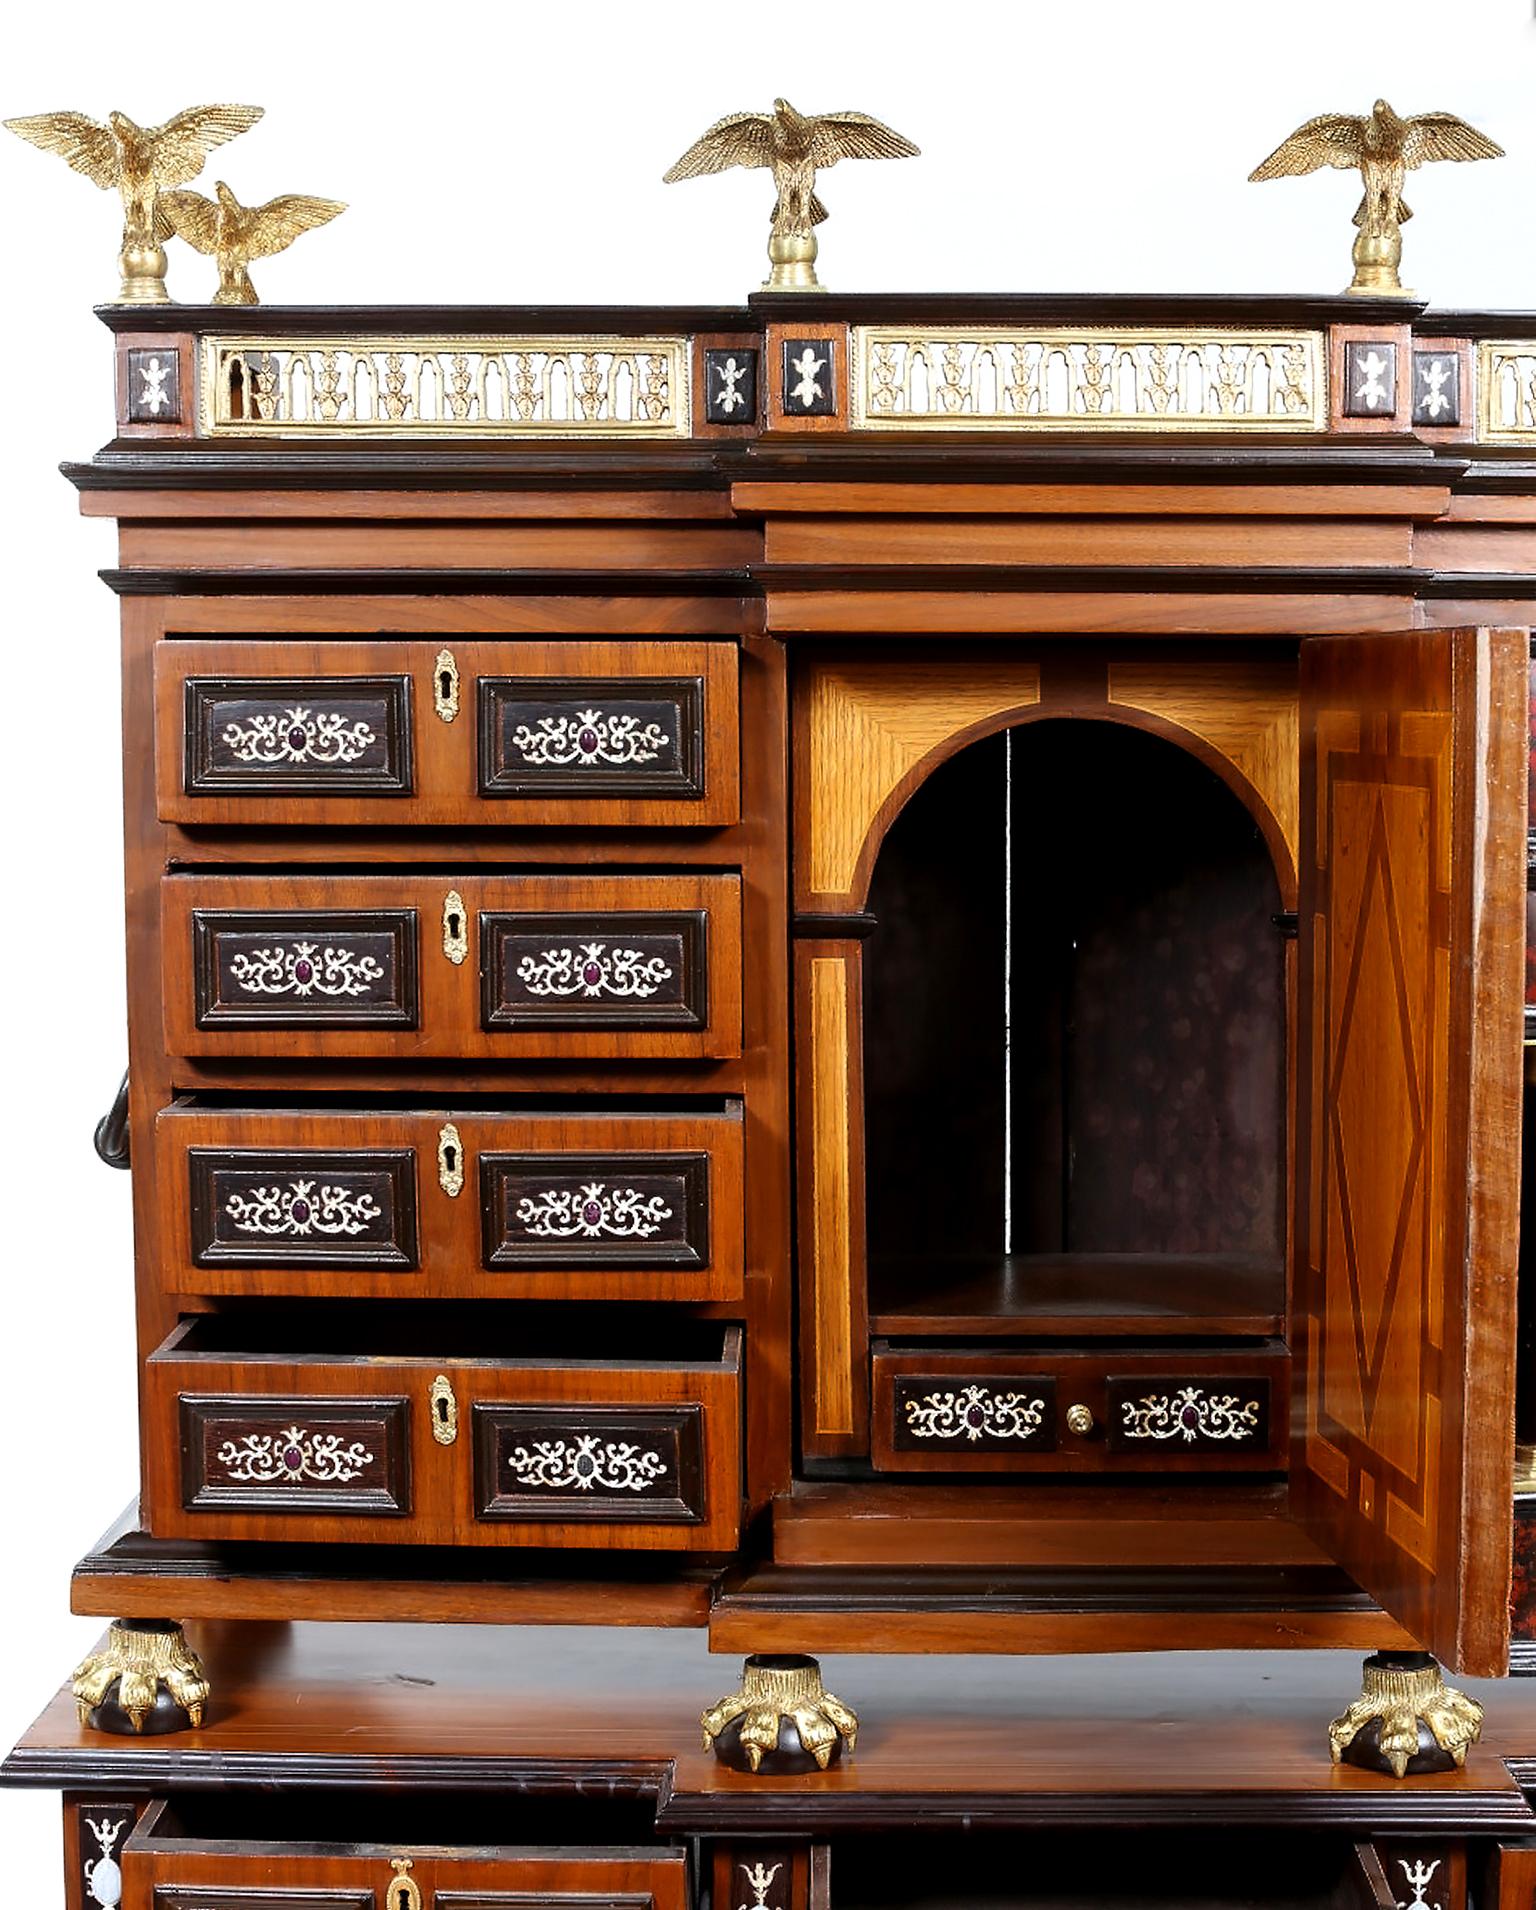 Renaissance style Spanish Vargueno cabinet on stand. Block front with ornately pierced ormolu gallery with eagle finials over a central door with columns flanked by eight drawers. Four on each side on ball and claw feet, resting on three drawer